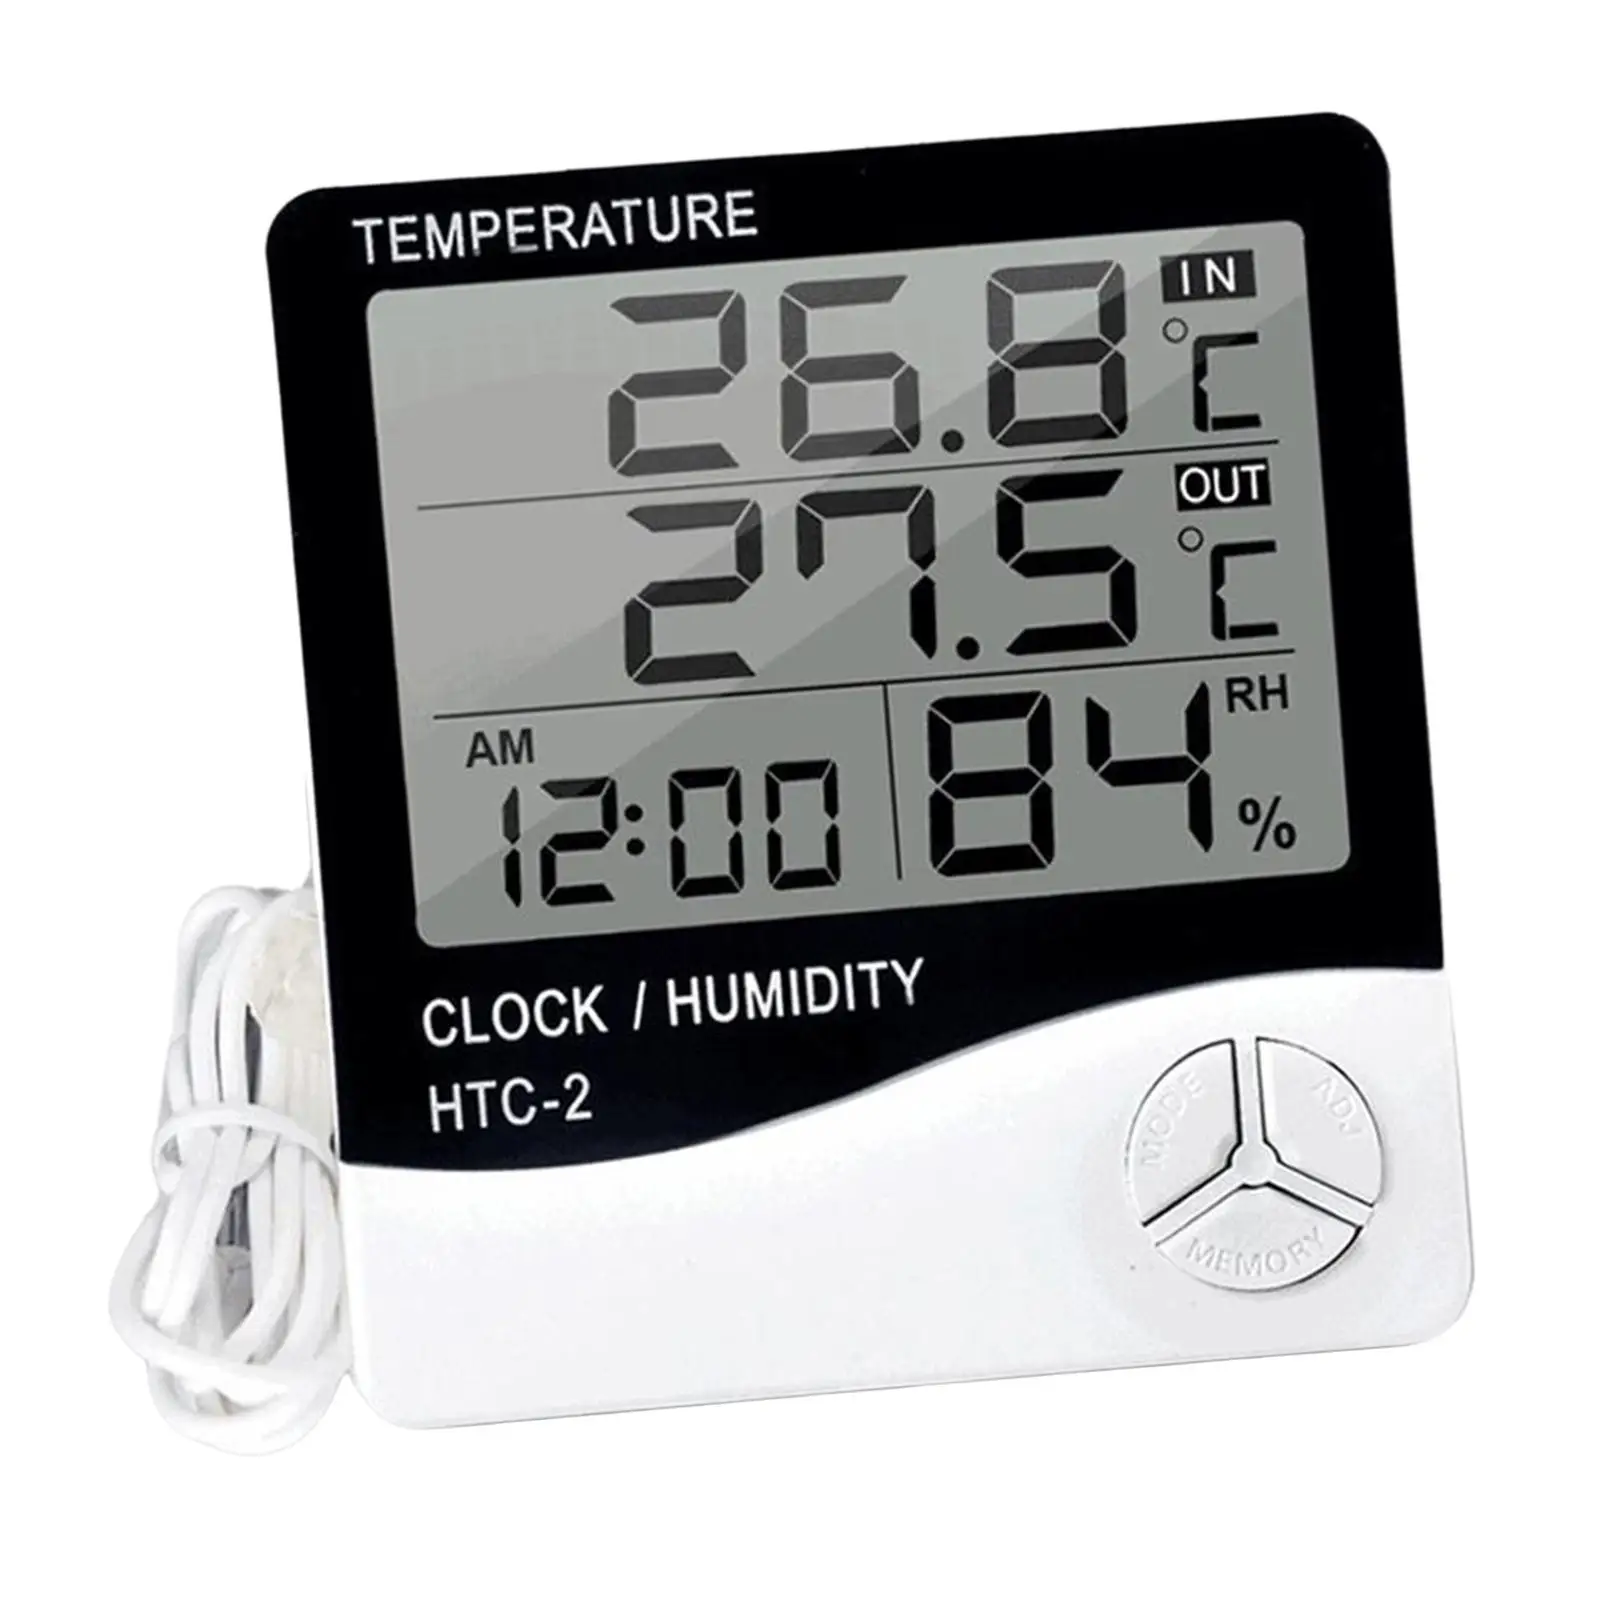 Portable Digital Temperature and Humidity Monitor for Home and Office